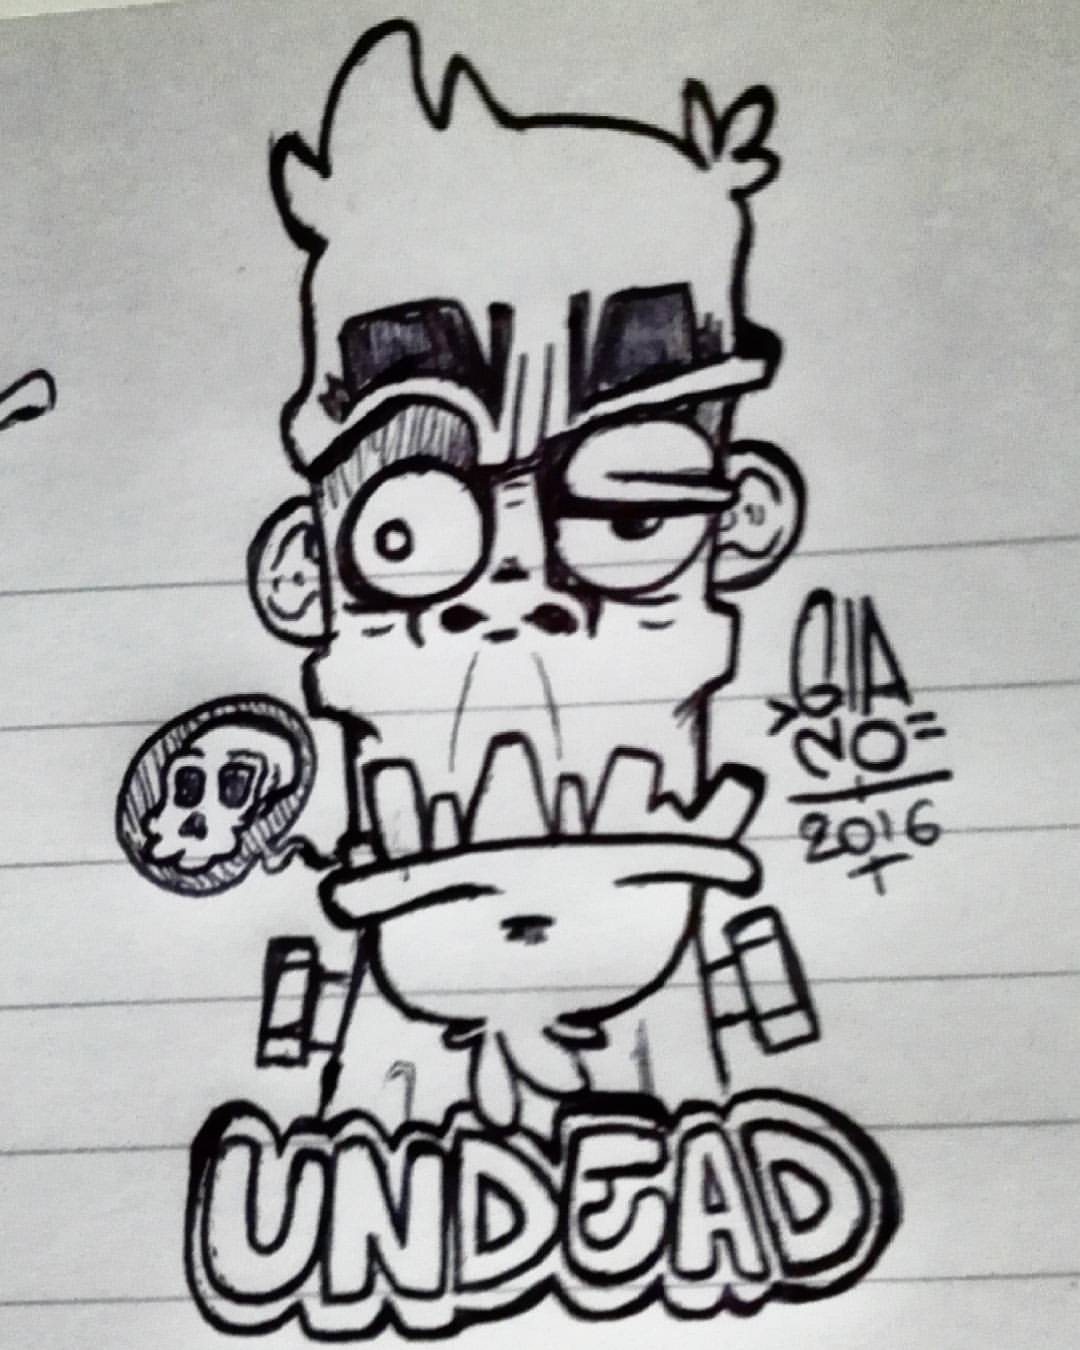 Gianoart UnDead Giano Undead Zombie Zombies Face